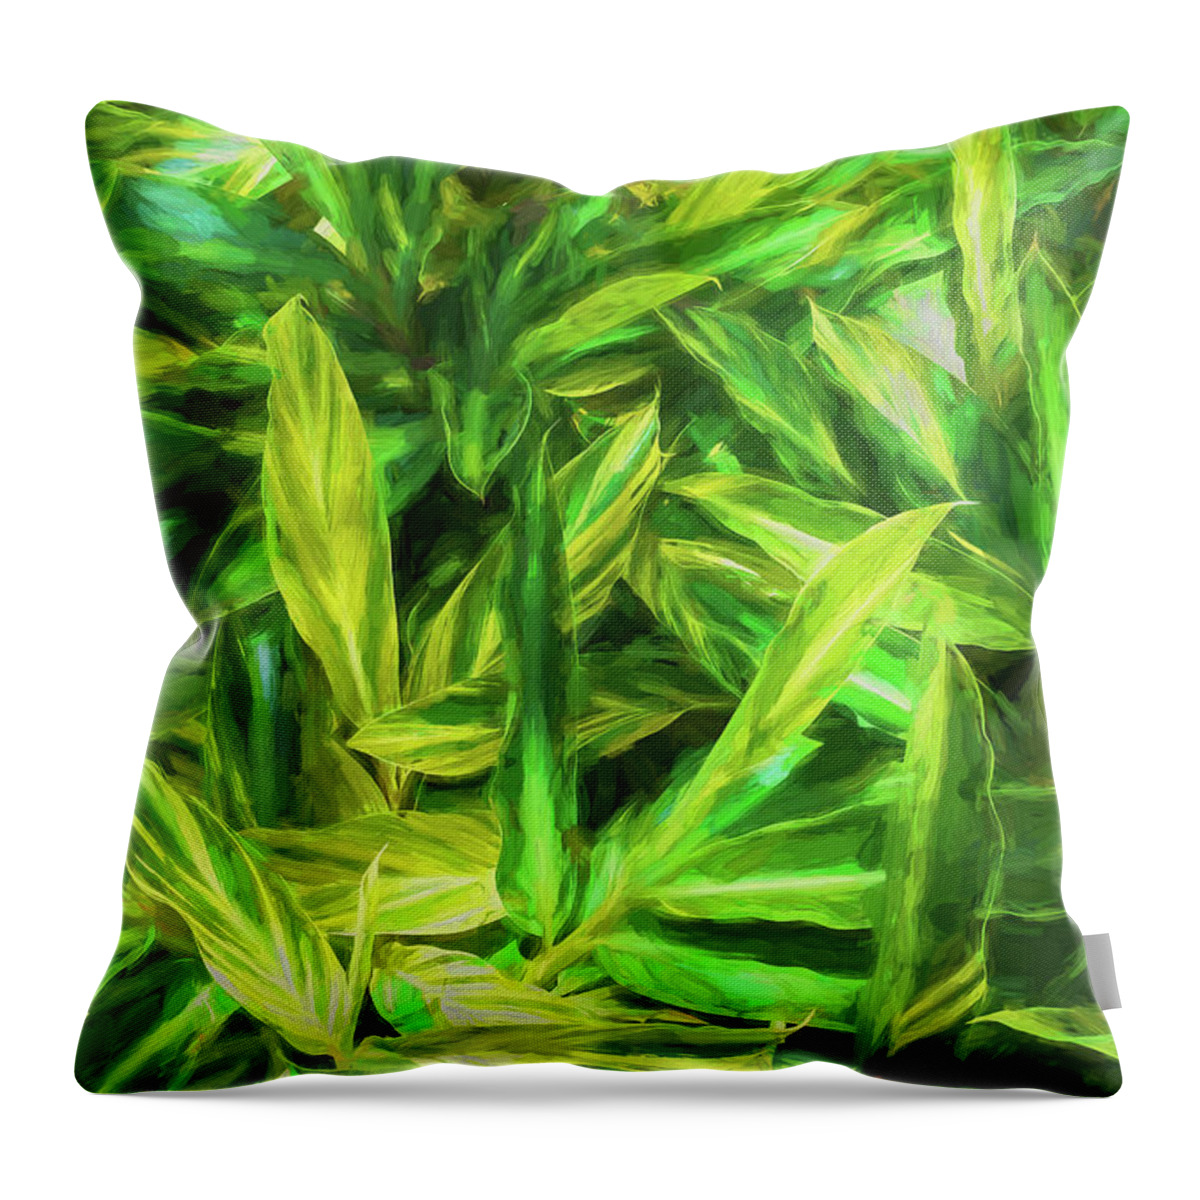 Ginger Alpinia Throw Pillow featuring the photograph Ginger Alpinia 100 by Rich Franco